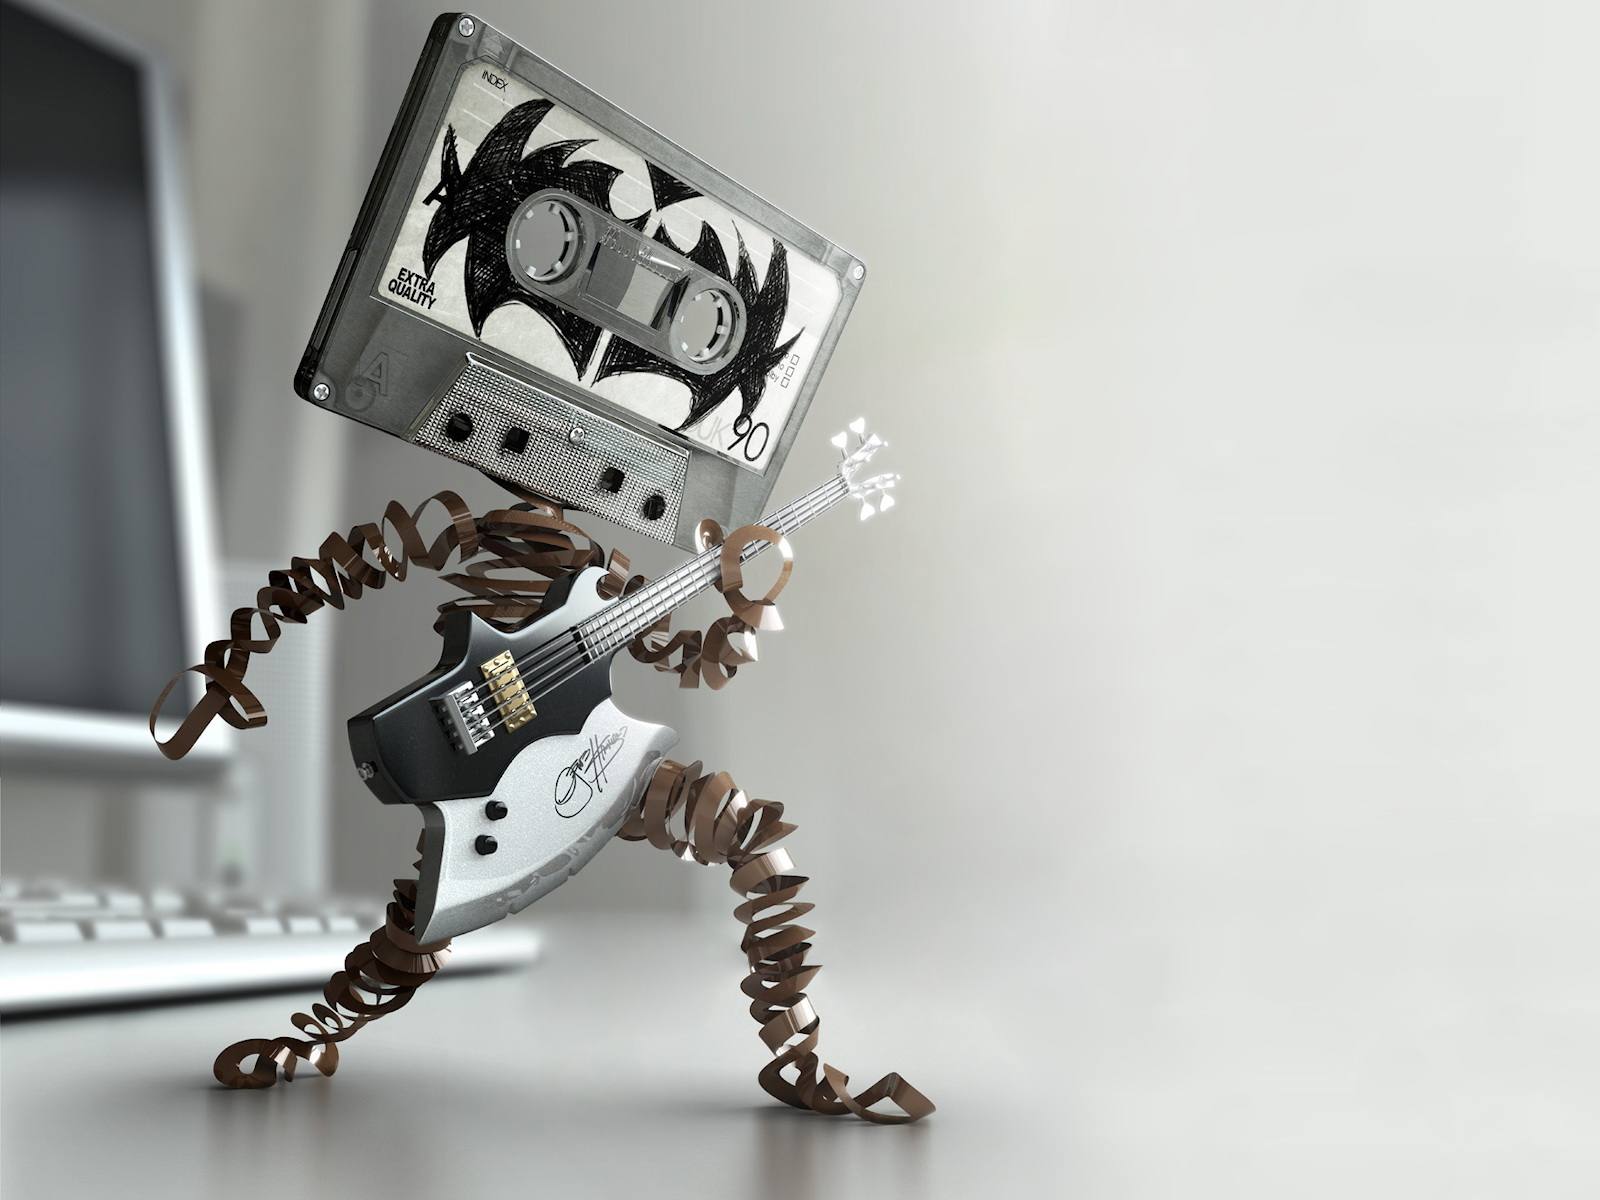 Cassette tape playing guitar